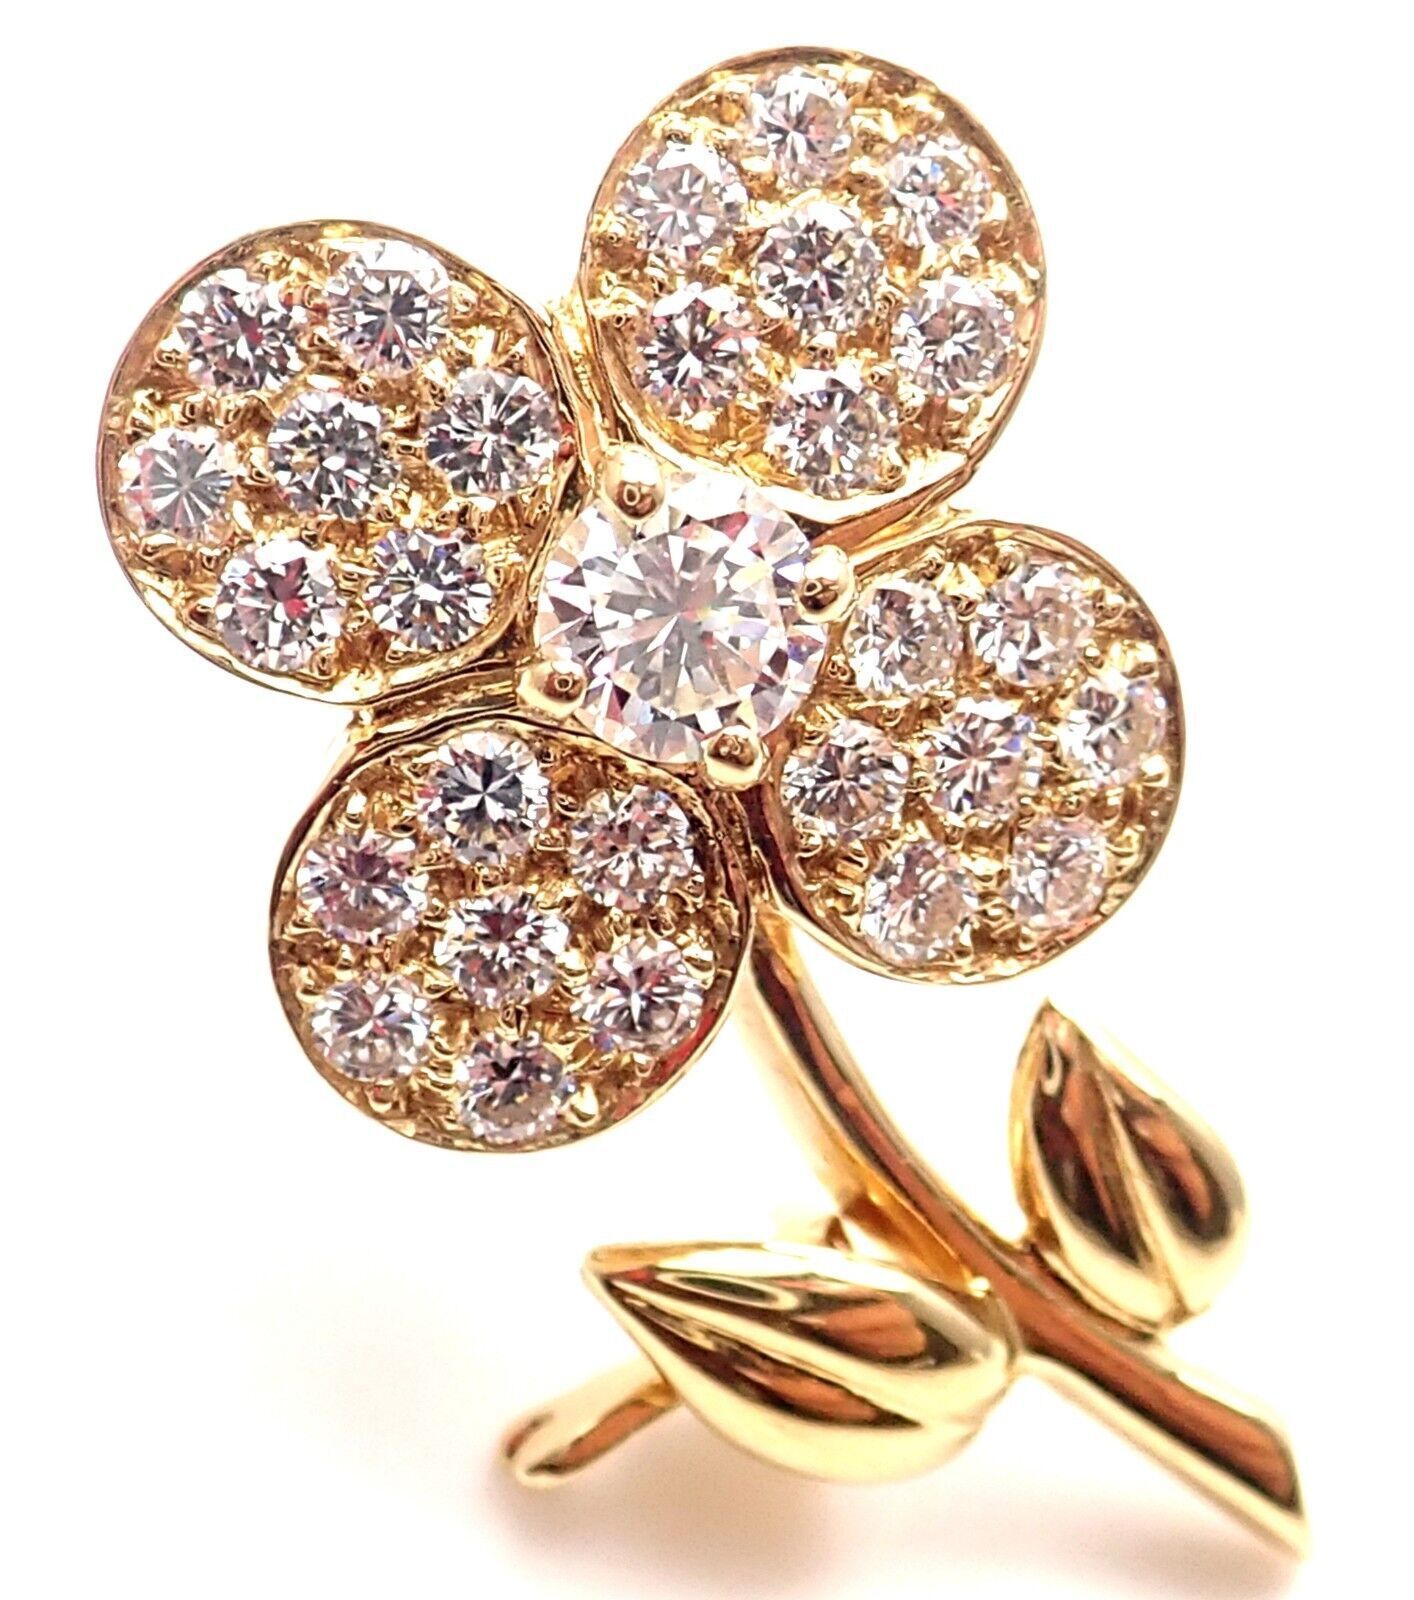 Van Cleef & Arpels Jewelry & Watches:Fine Jewelry:Brooches & Pins Rare! Authentic Van Cleef & Arpels Diamond 18k Yellow Gold Flower Pin Brooch